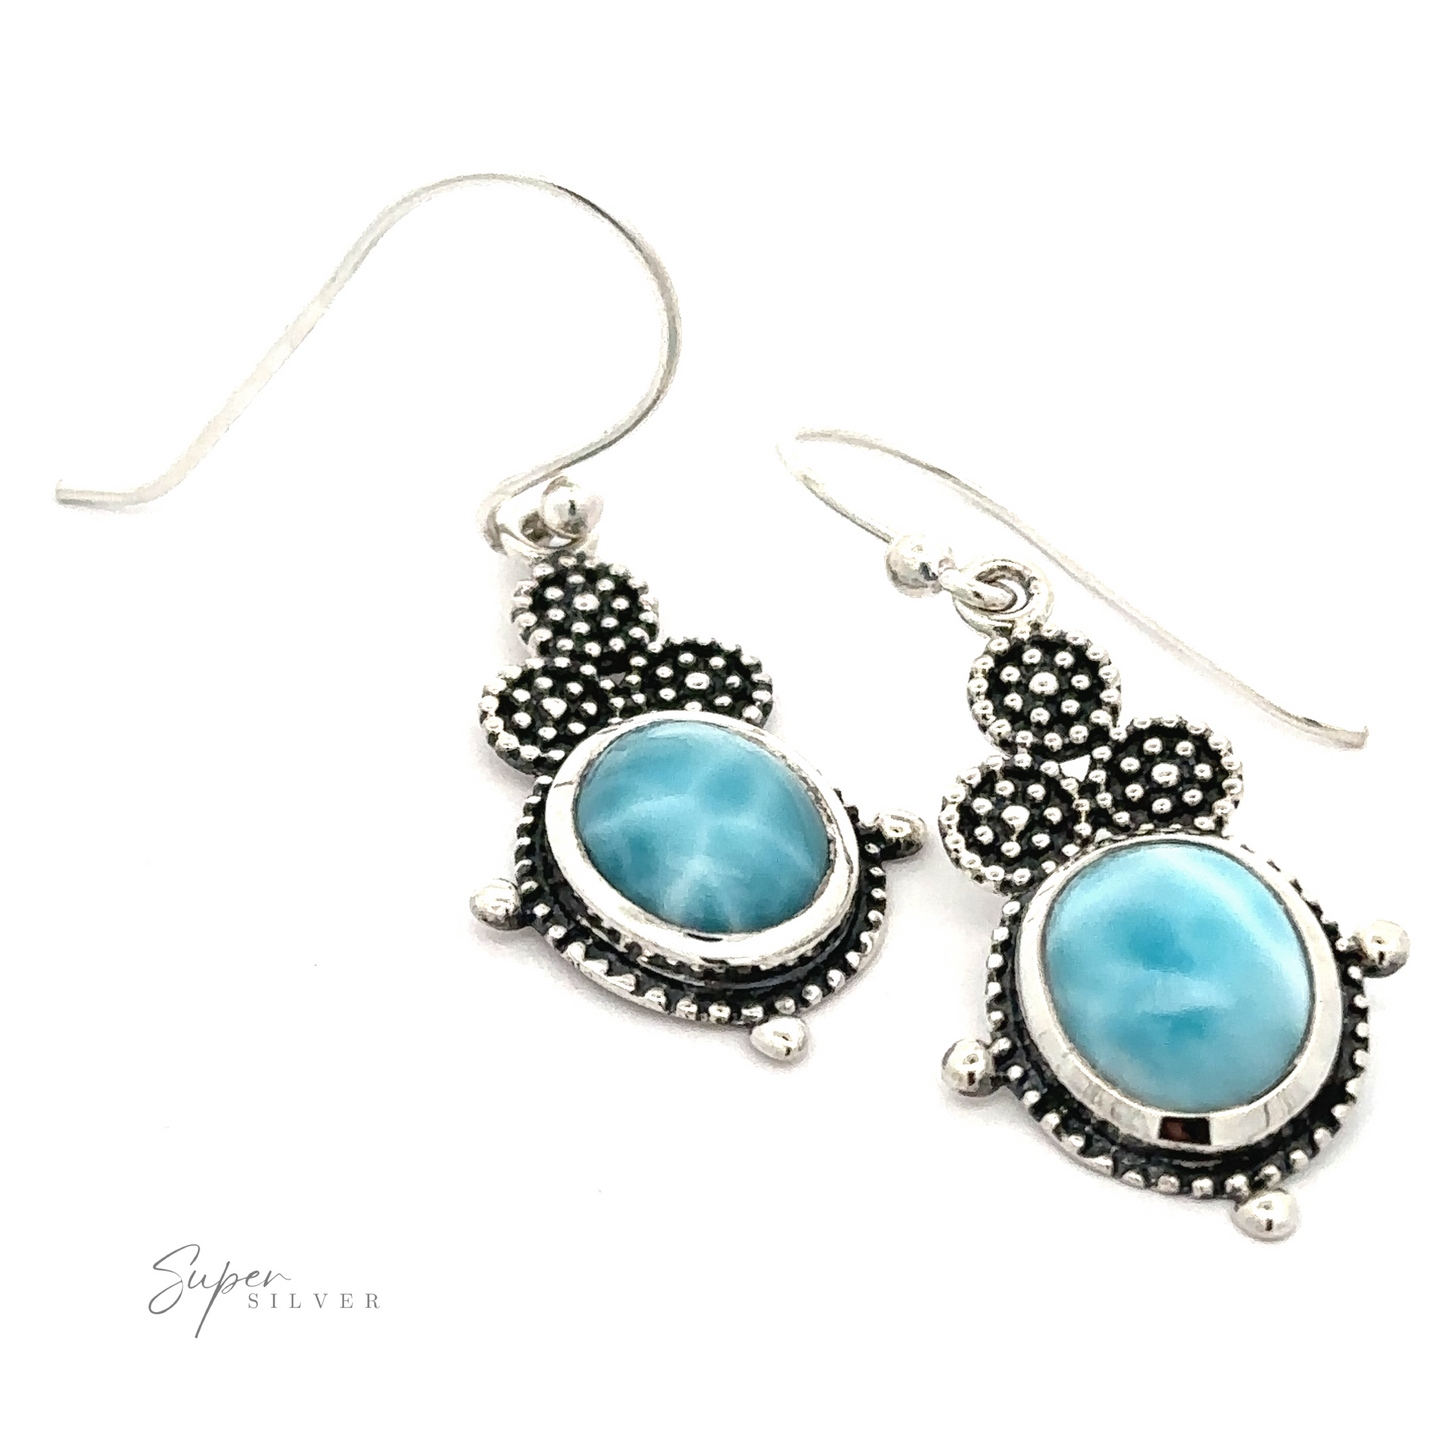 
                  
                    A pair of elegant Beaded Oval Larimar Dangle Earrings featuring oval blue Larimar stones with intricate beaded detailing around the gems. The hook attachments are simple and sleek. The image includes the text "Super Silver.
                  
                